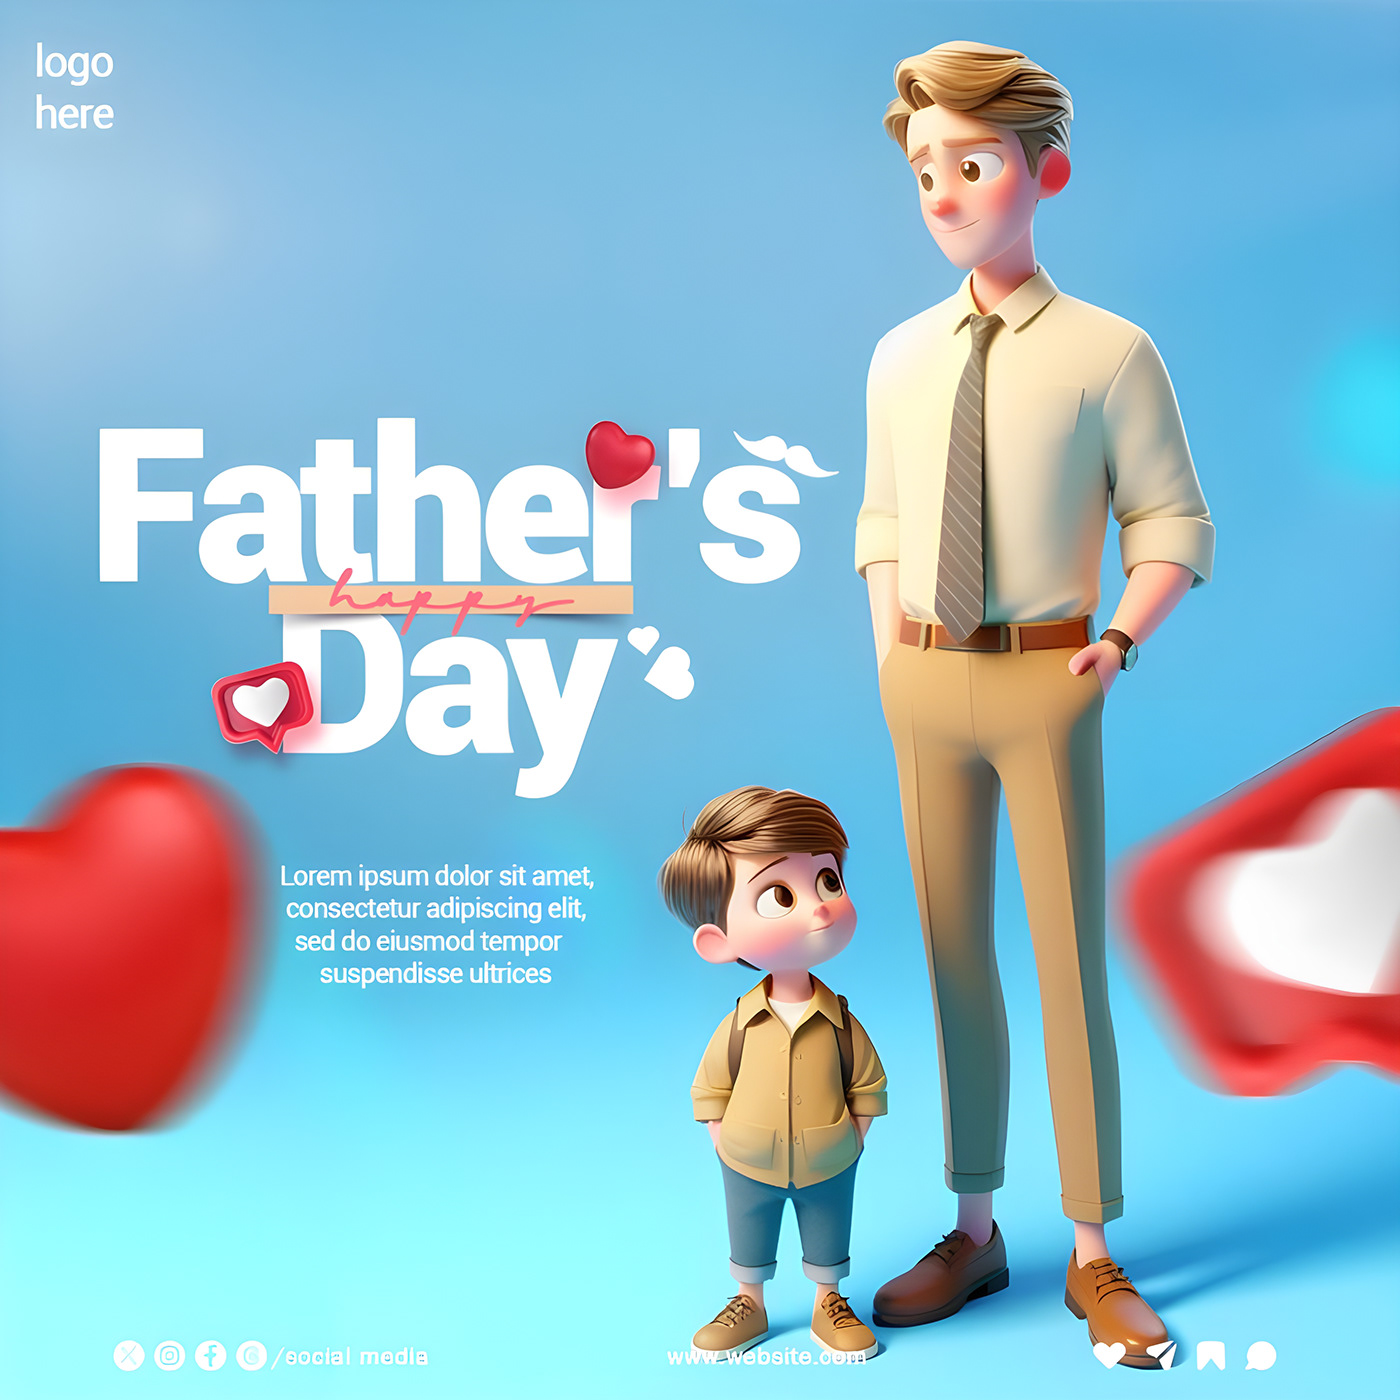 Father's Day Fathers Day father papa family iloveyou Social media post Social Media Design graphic design  dad